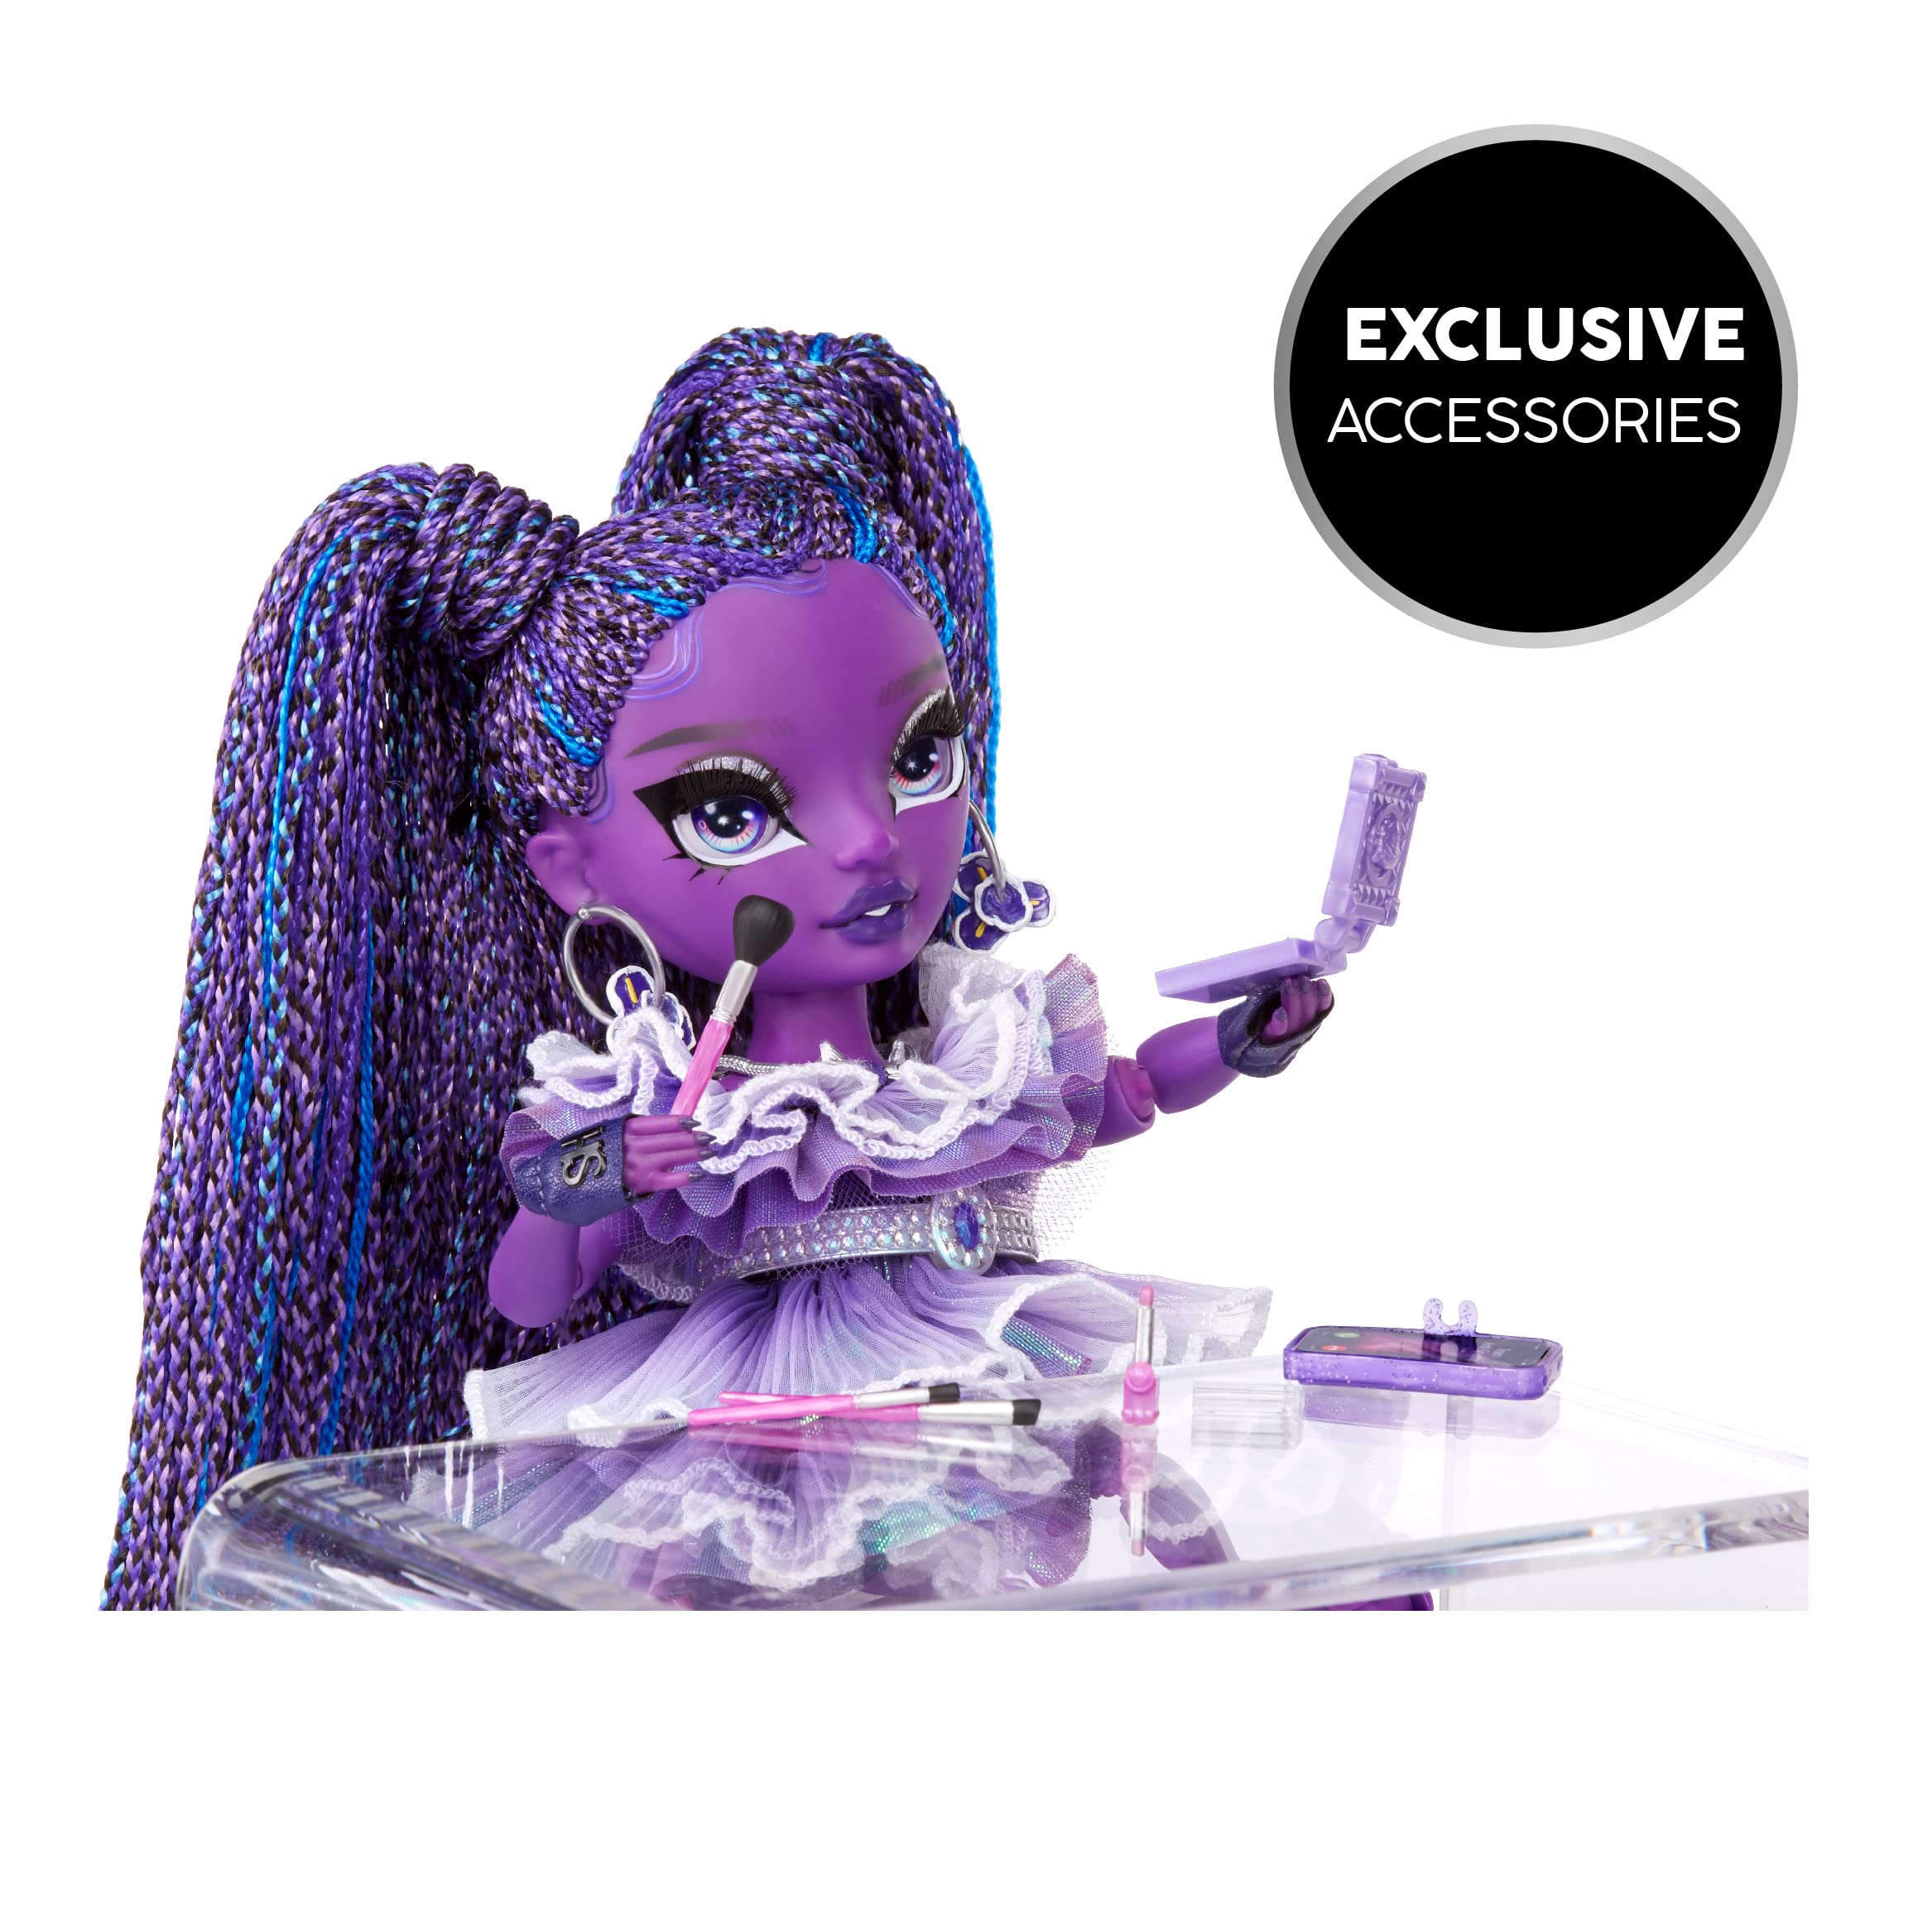 Rainbow High Shadow High Monique Verbena - Purple Fashion Doll. Fashionable Outfit & 10+ Colorful Play Accessories. Great Gift for Kids 4-12 Years Old & Collectors